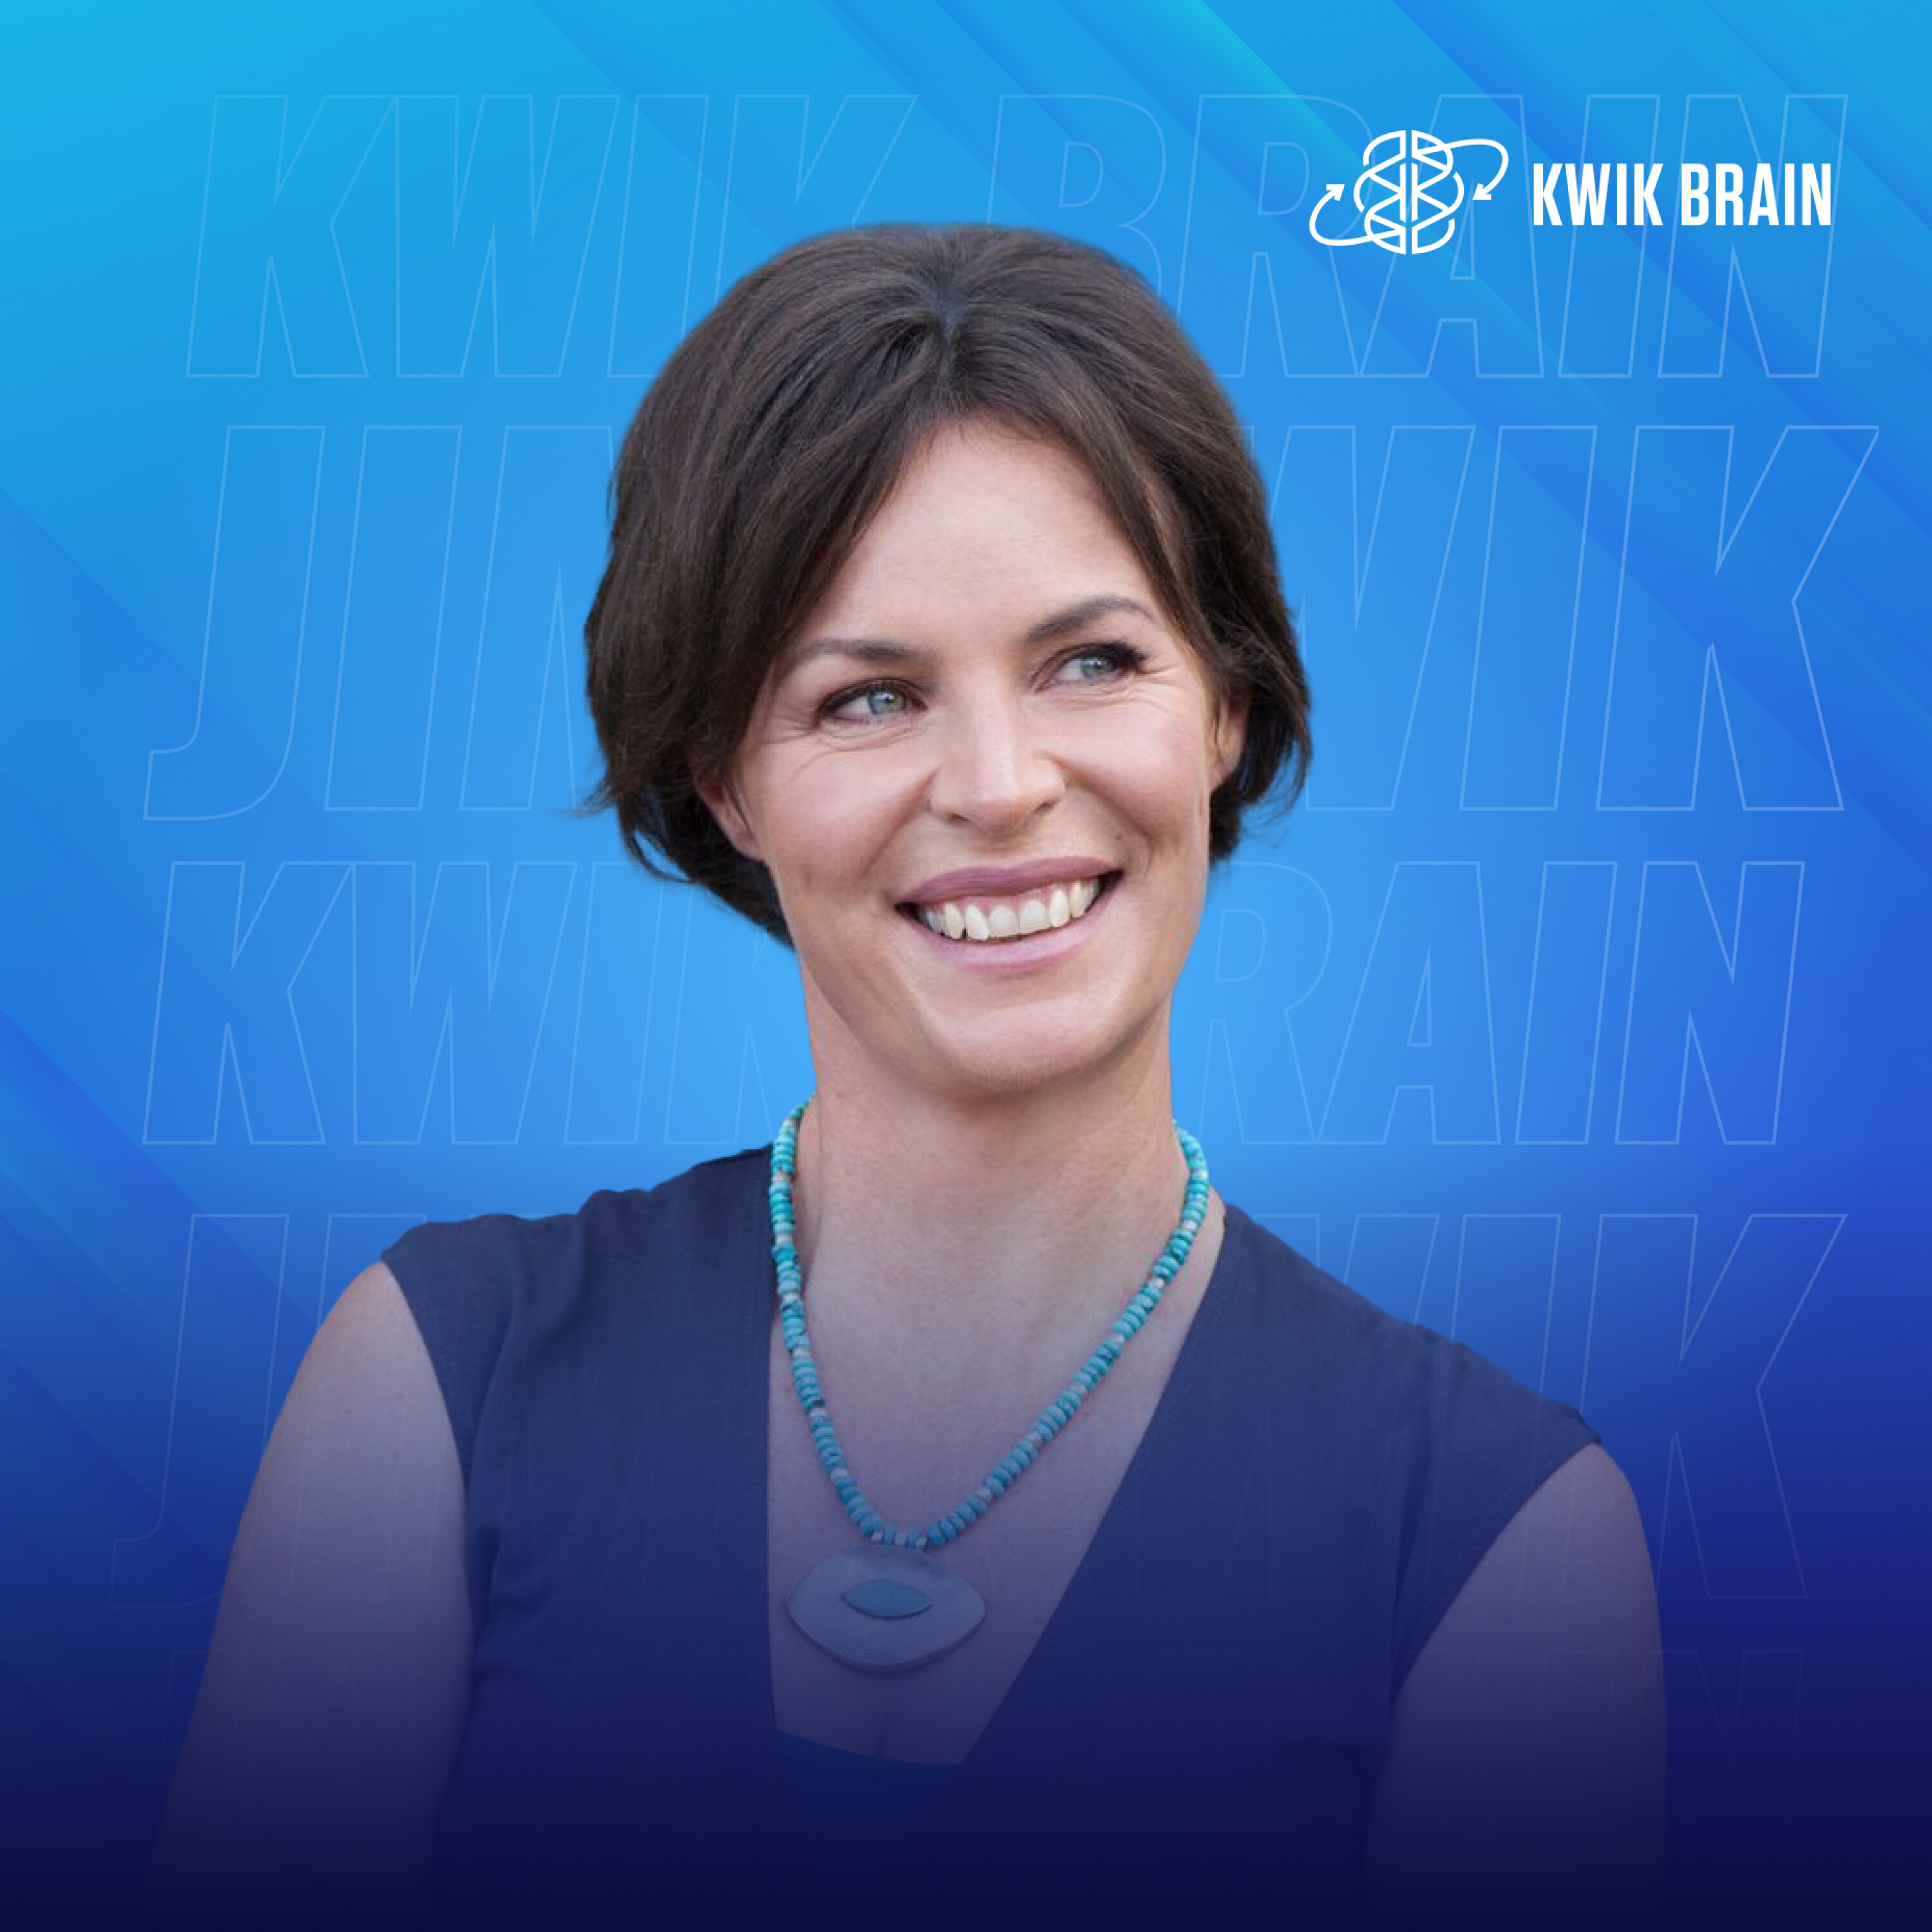 The Neuroscience of Better Health & Communication with Dr. Sarah McKay